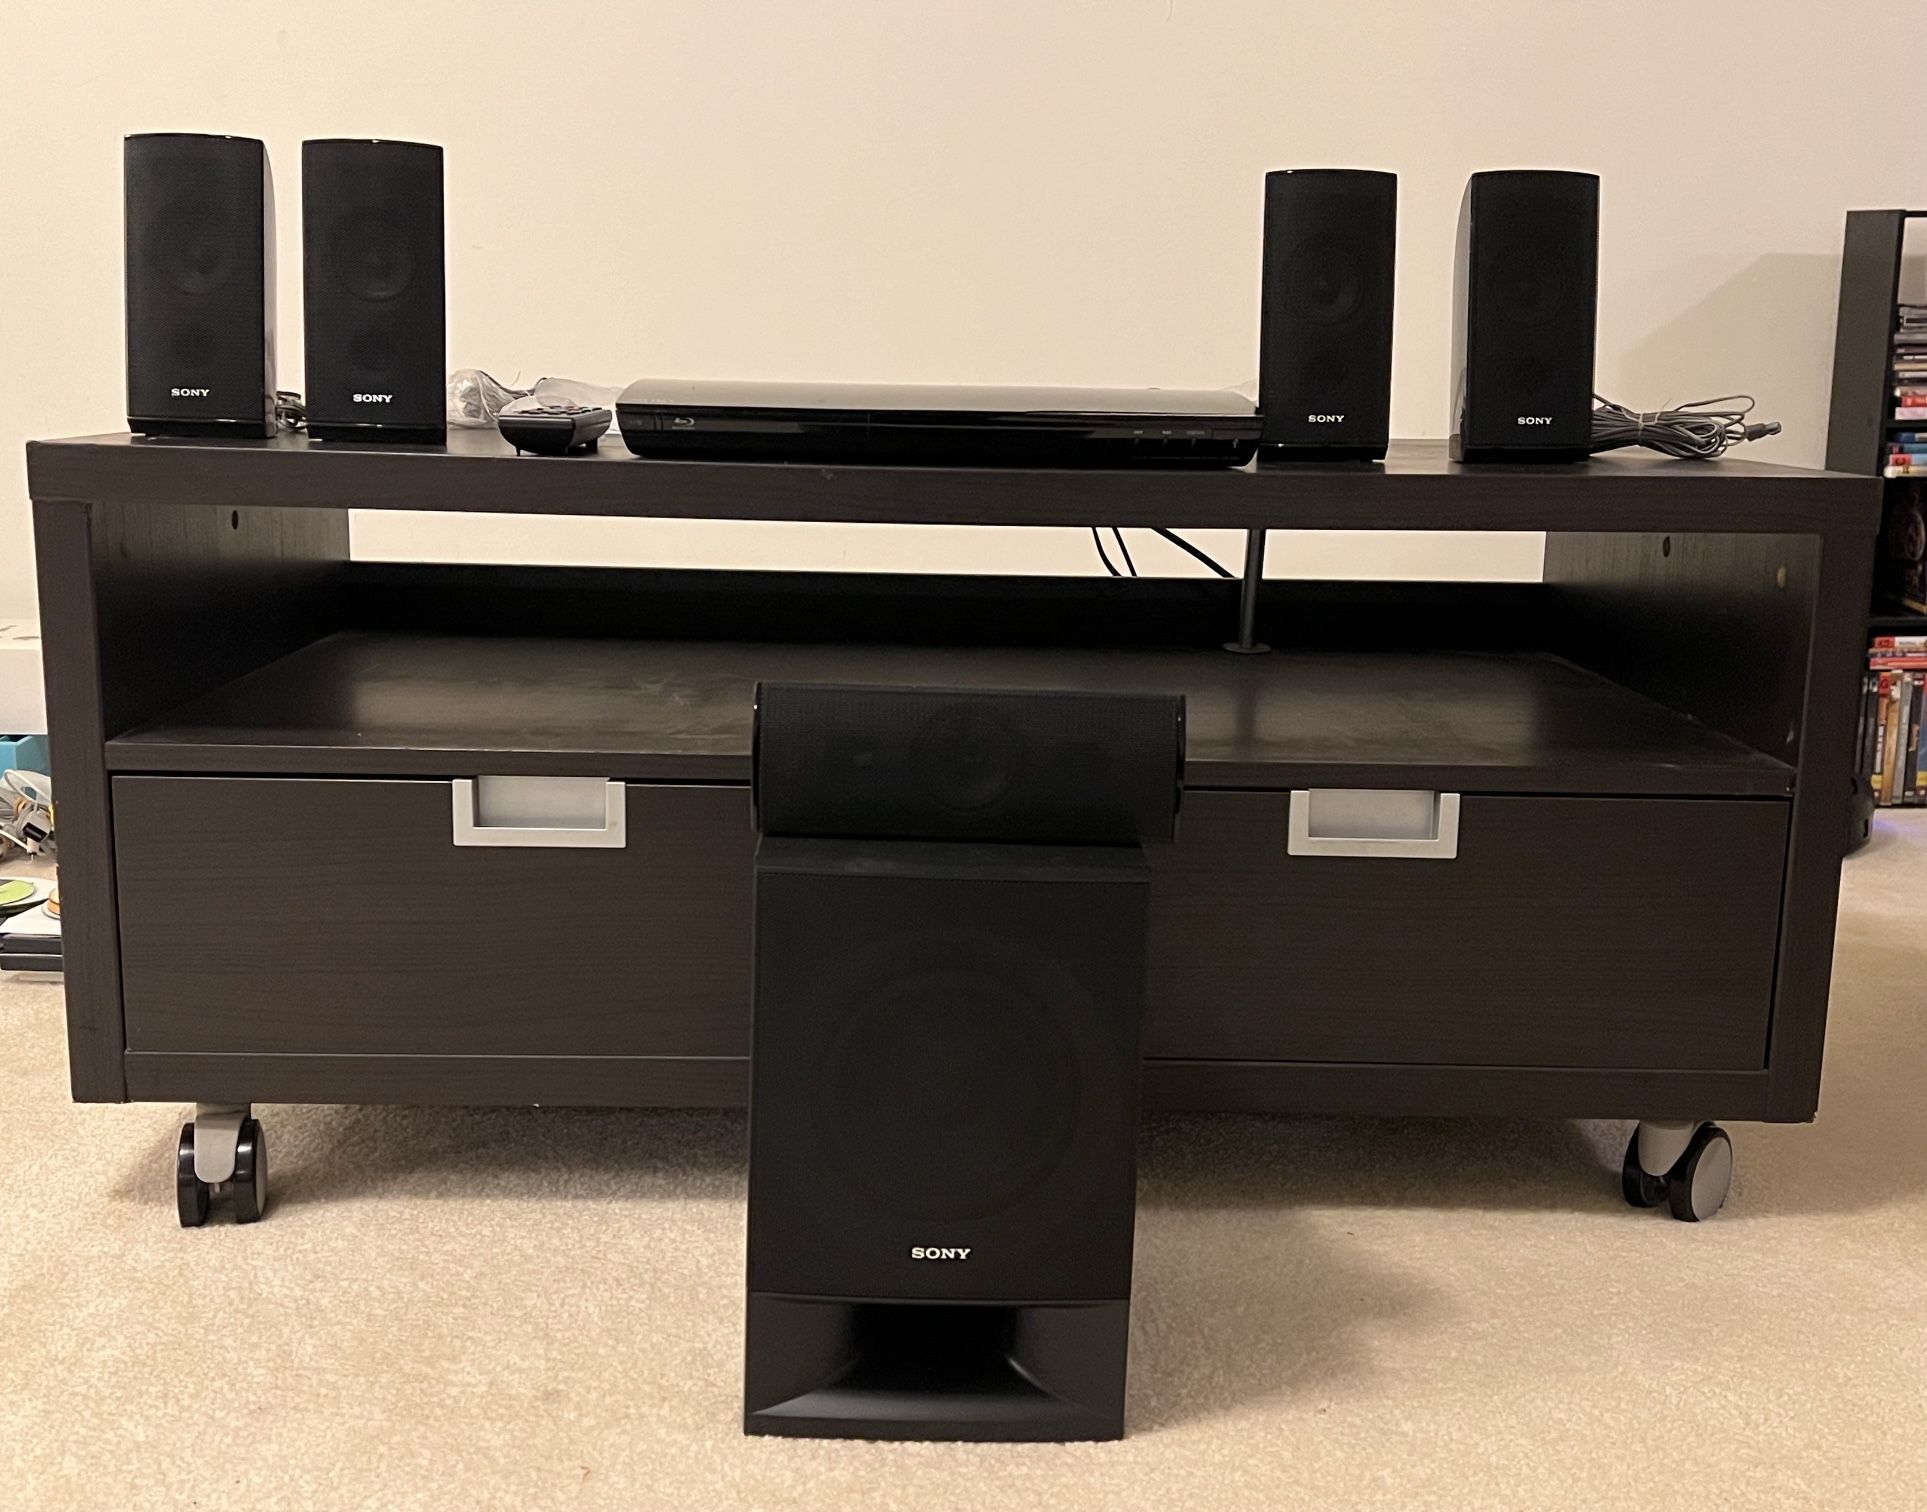 Sony 3d Blue Ray Disc Home Theater System – Complete set